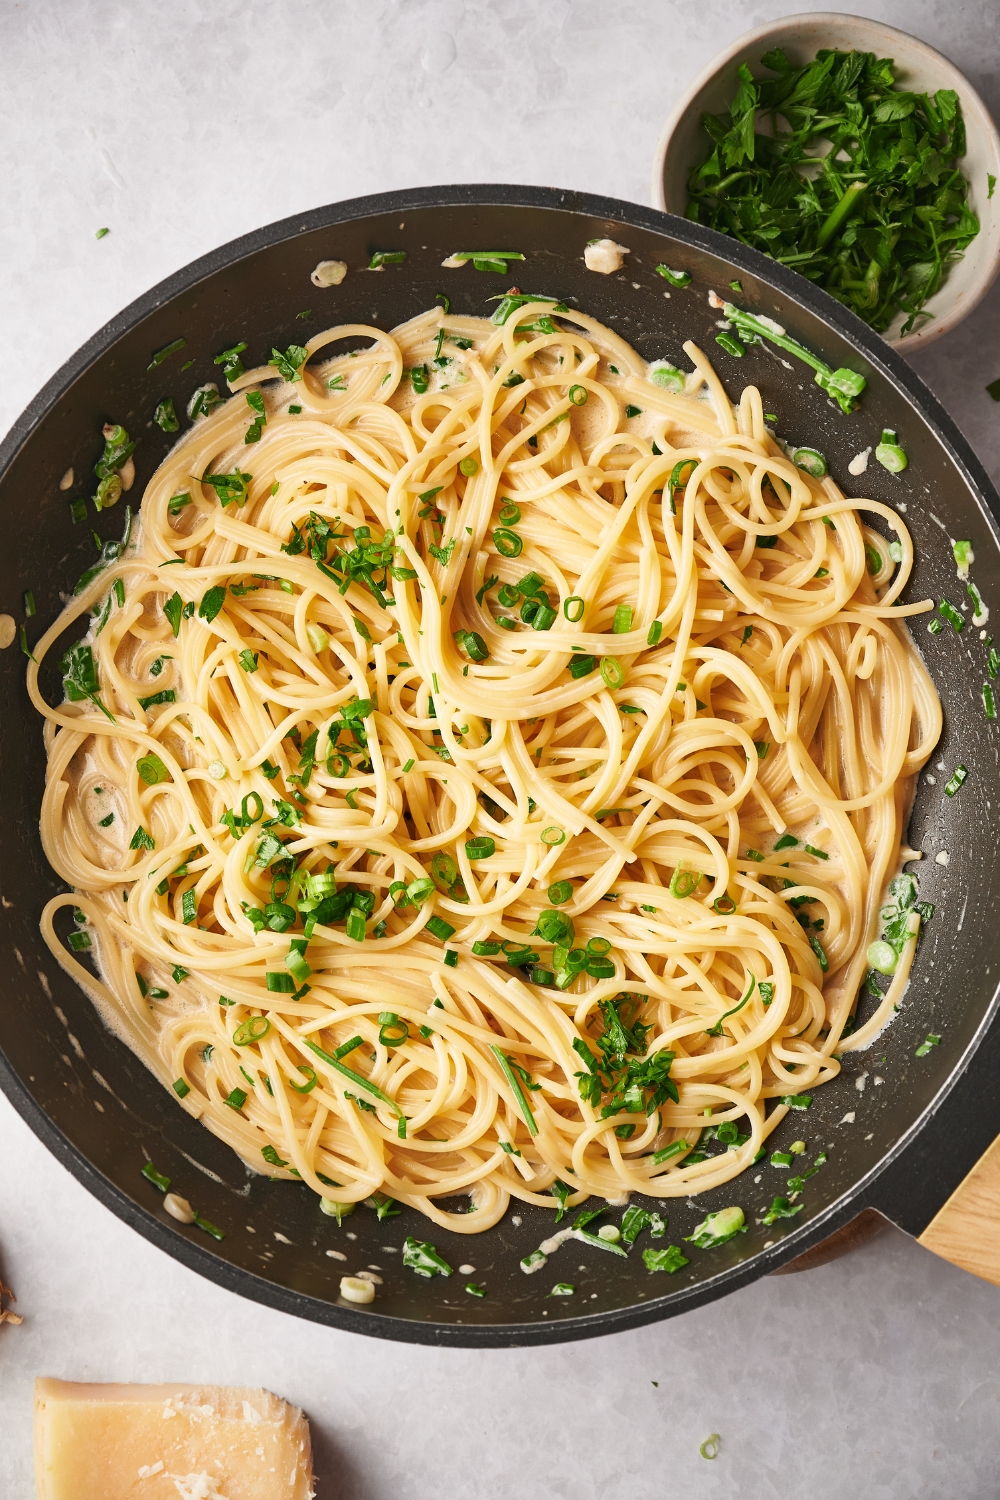 A skillet with cooked spaghetti in a cream sauce and garnished with fresh herbs and green onion.